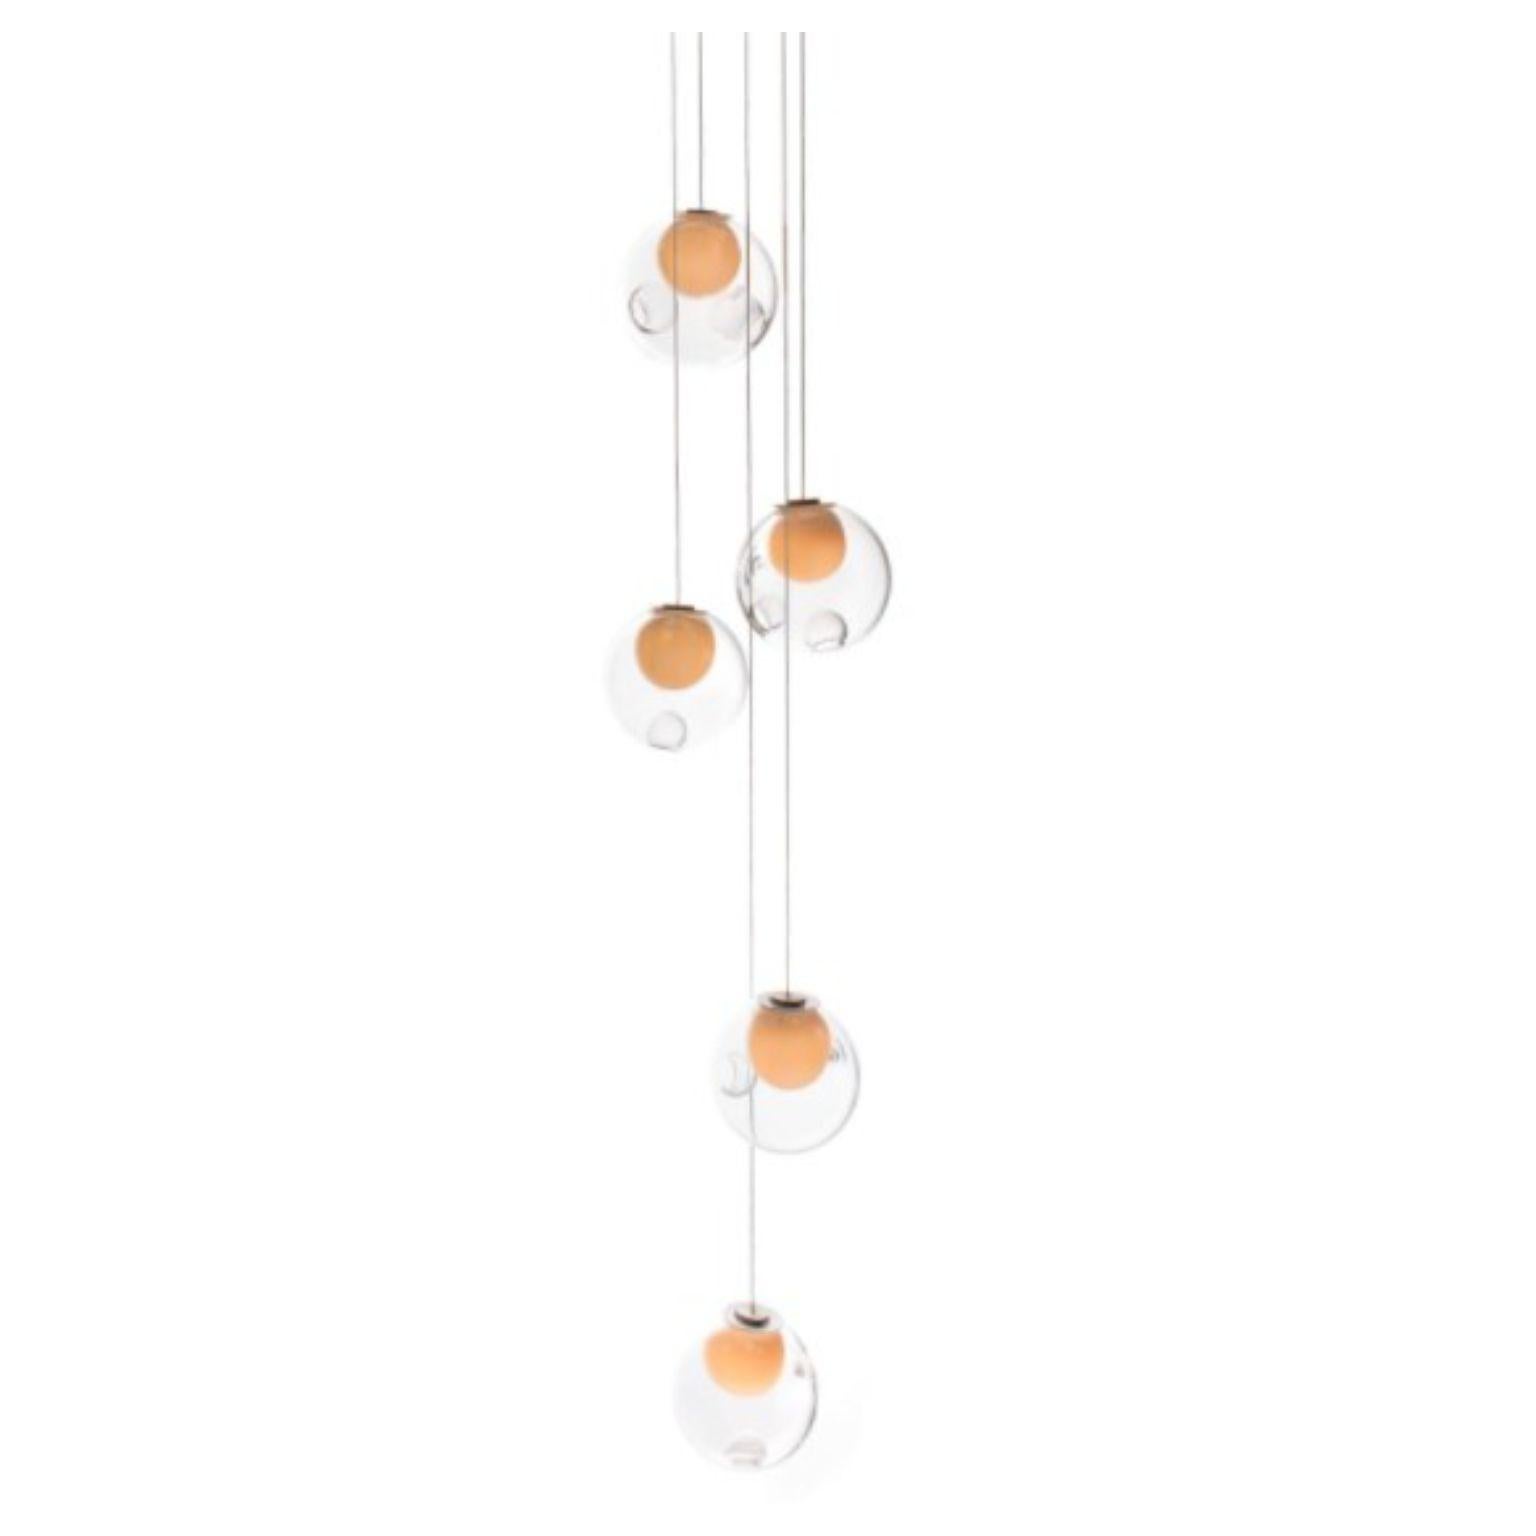 28.5 Pendant by Bocci
Dimensions: D 20.3 x H 300 cm
Materials: diameter brushed nickel canopy
Weight: 6 kg
Also available in different dimensions.
All our lamps can be wired according to each country. If sold to the USA it will be wired for the